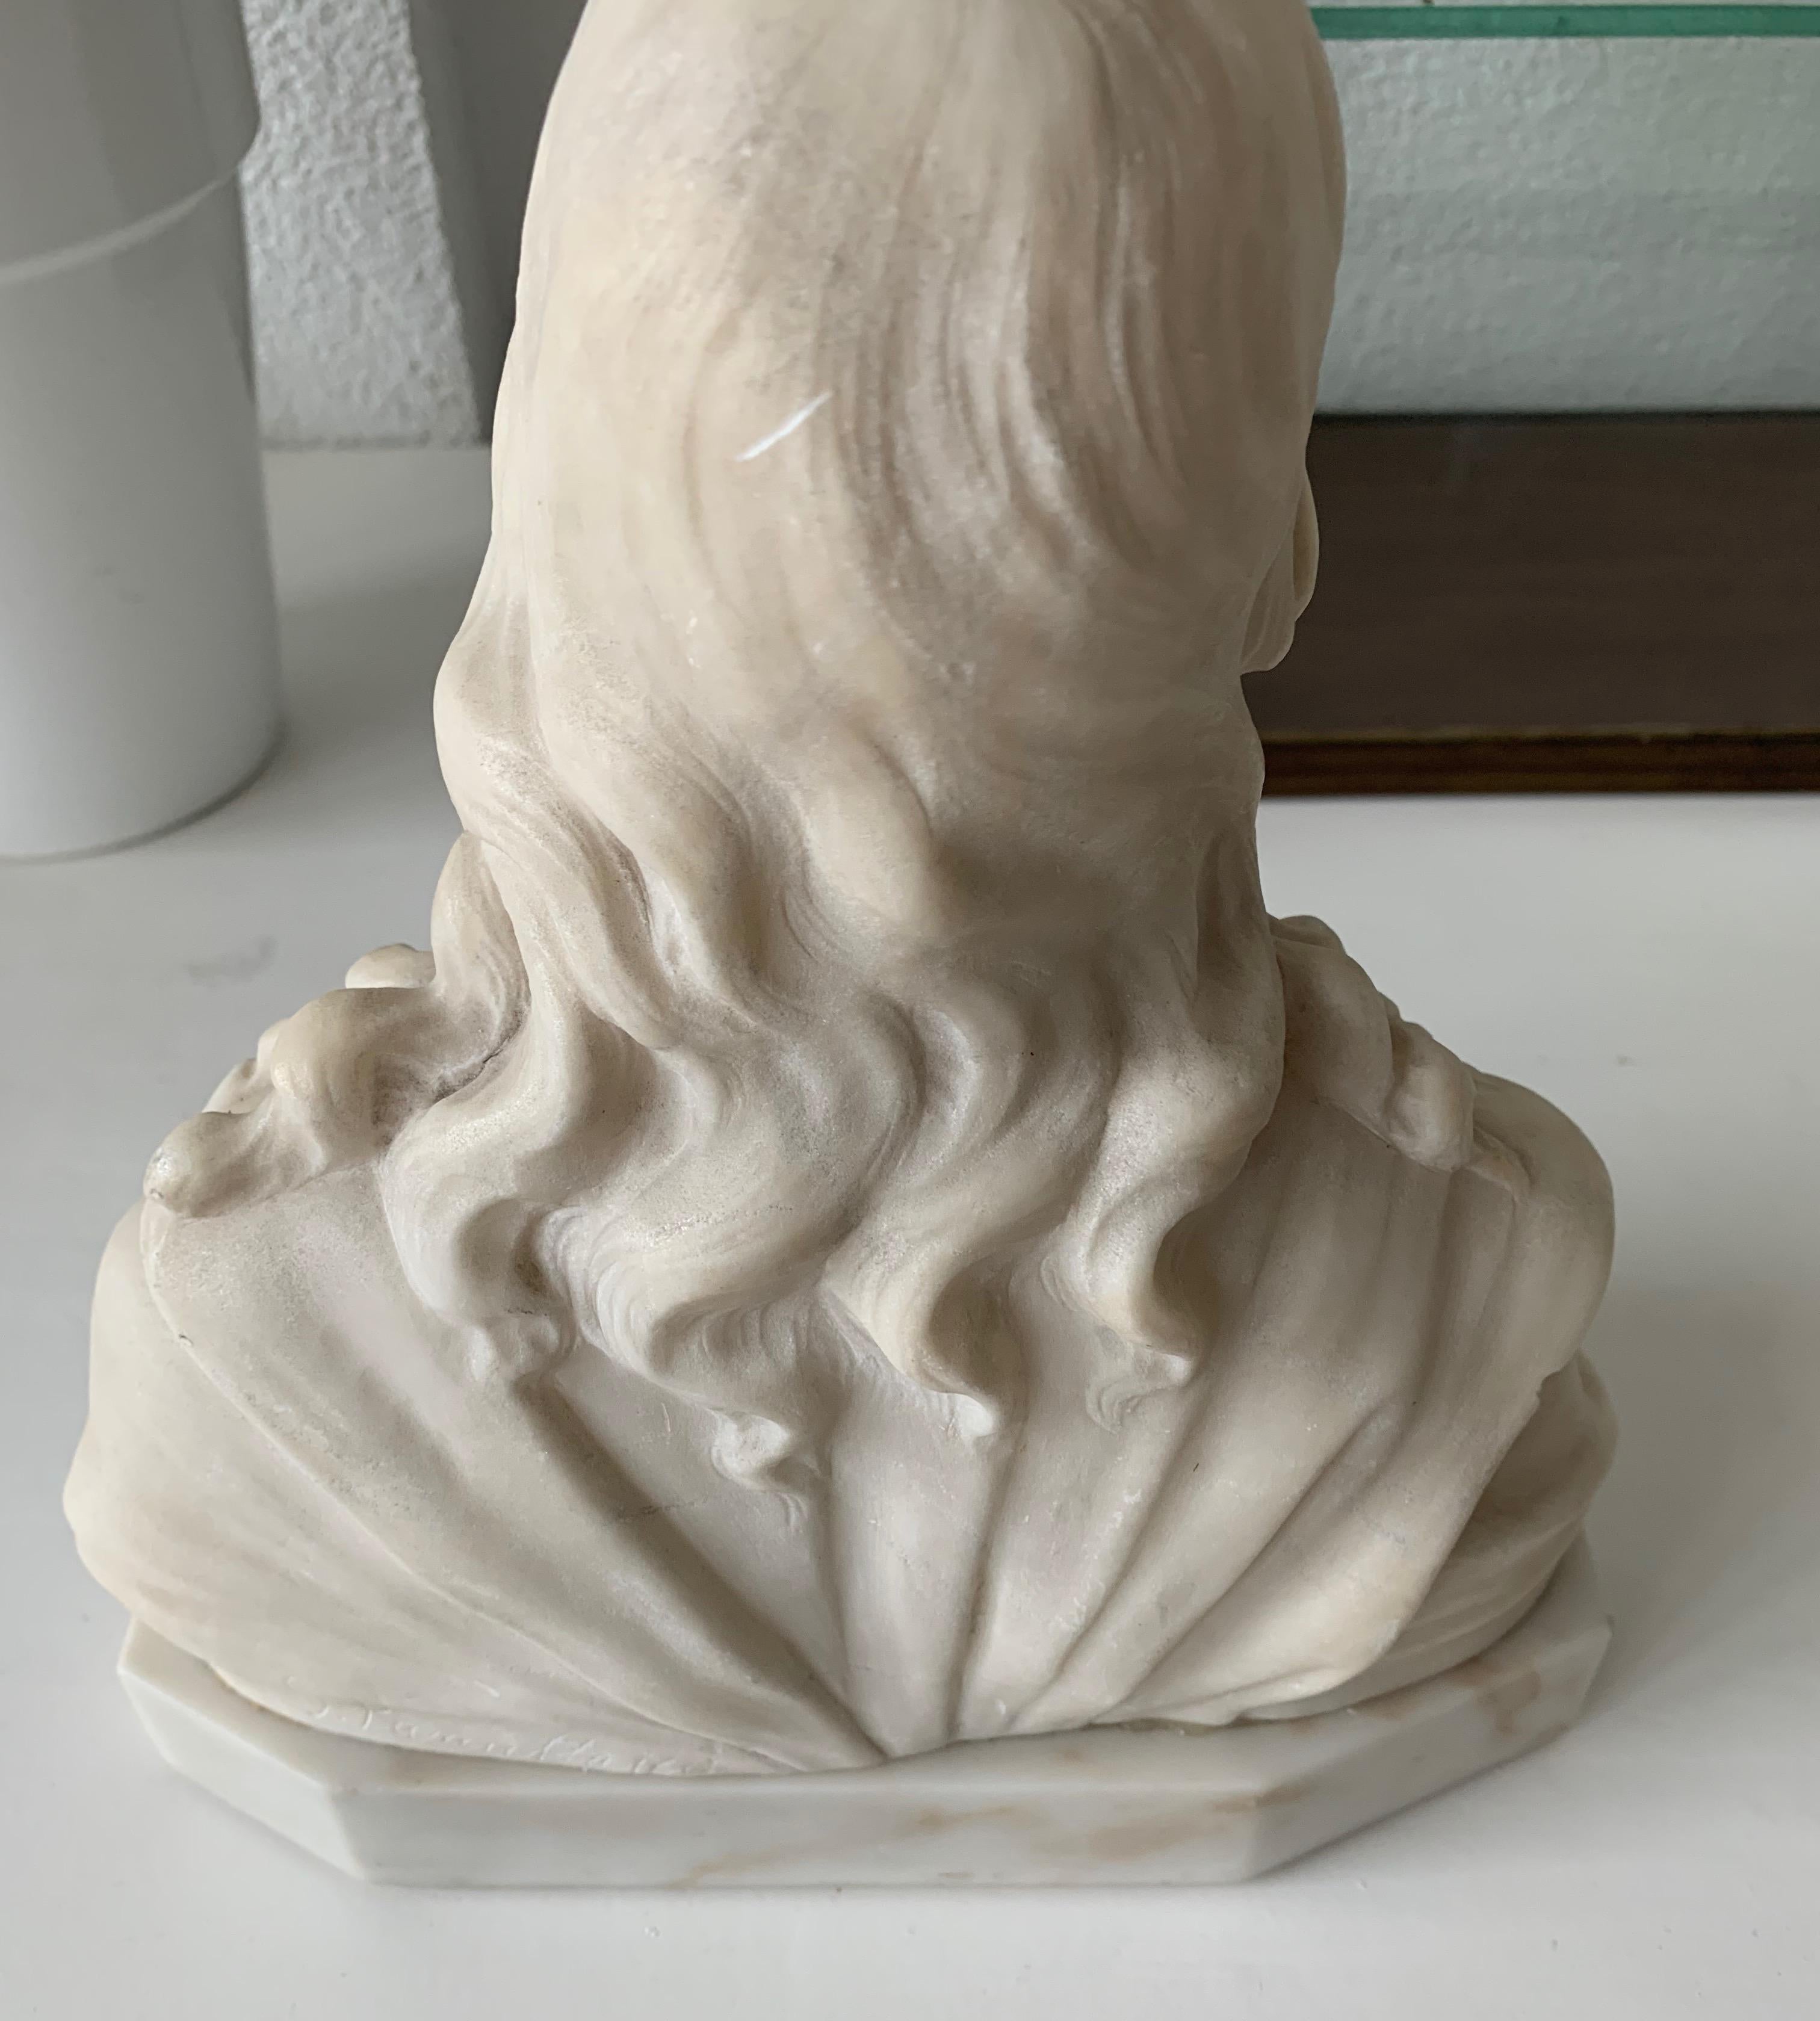 20th Century Early 1900s Signed Marble Sculpture / Bust of Jesus Christ on an Art Deco Base